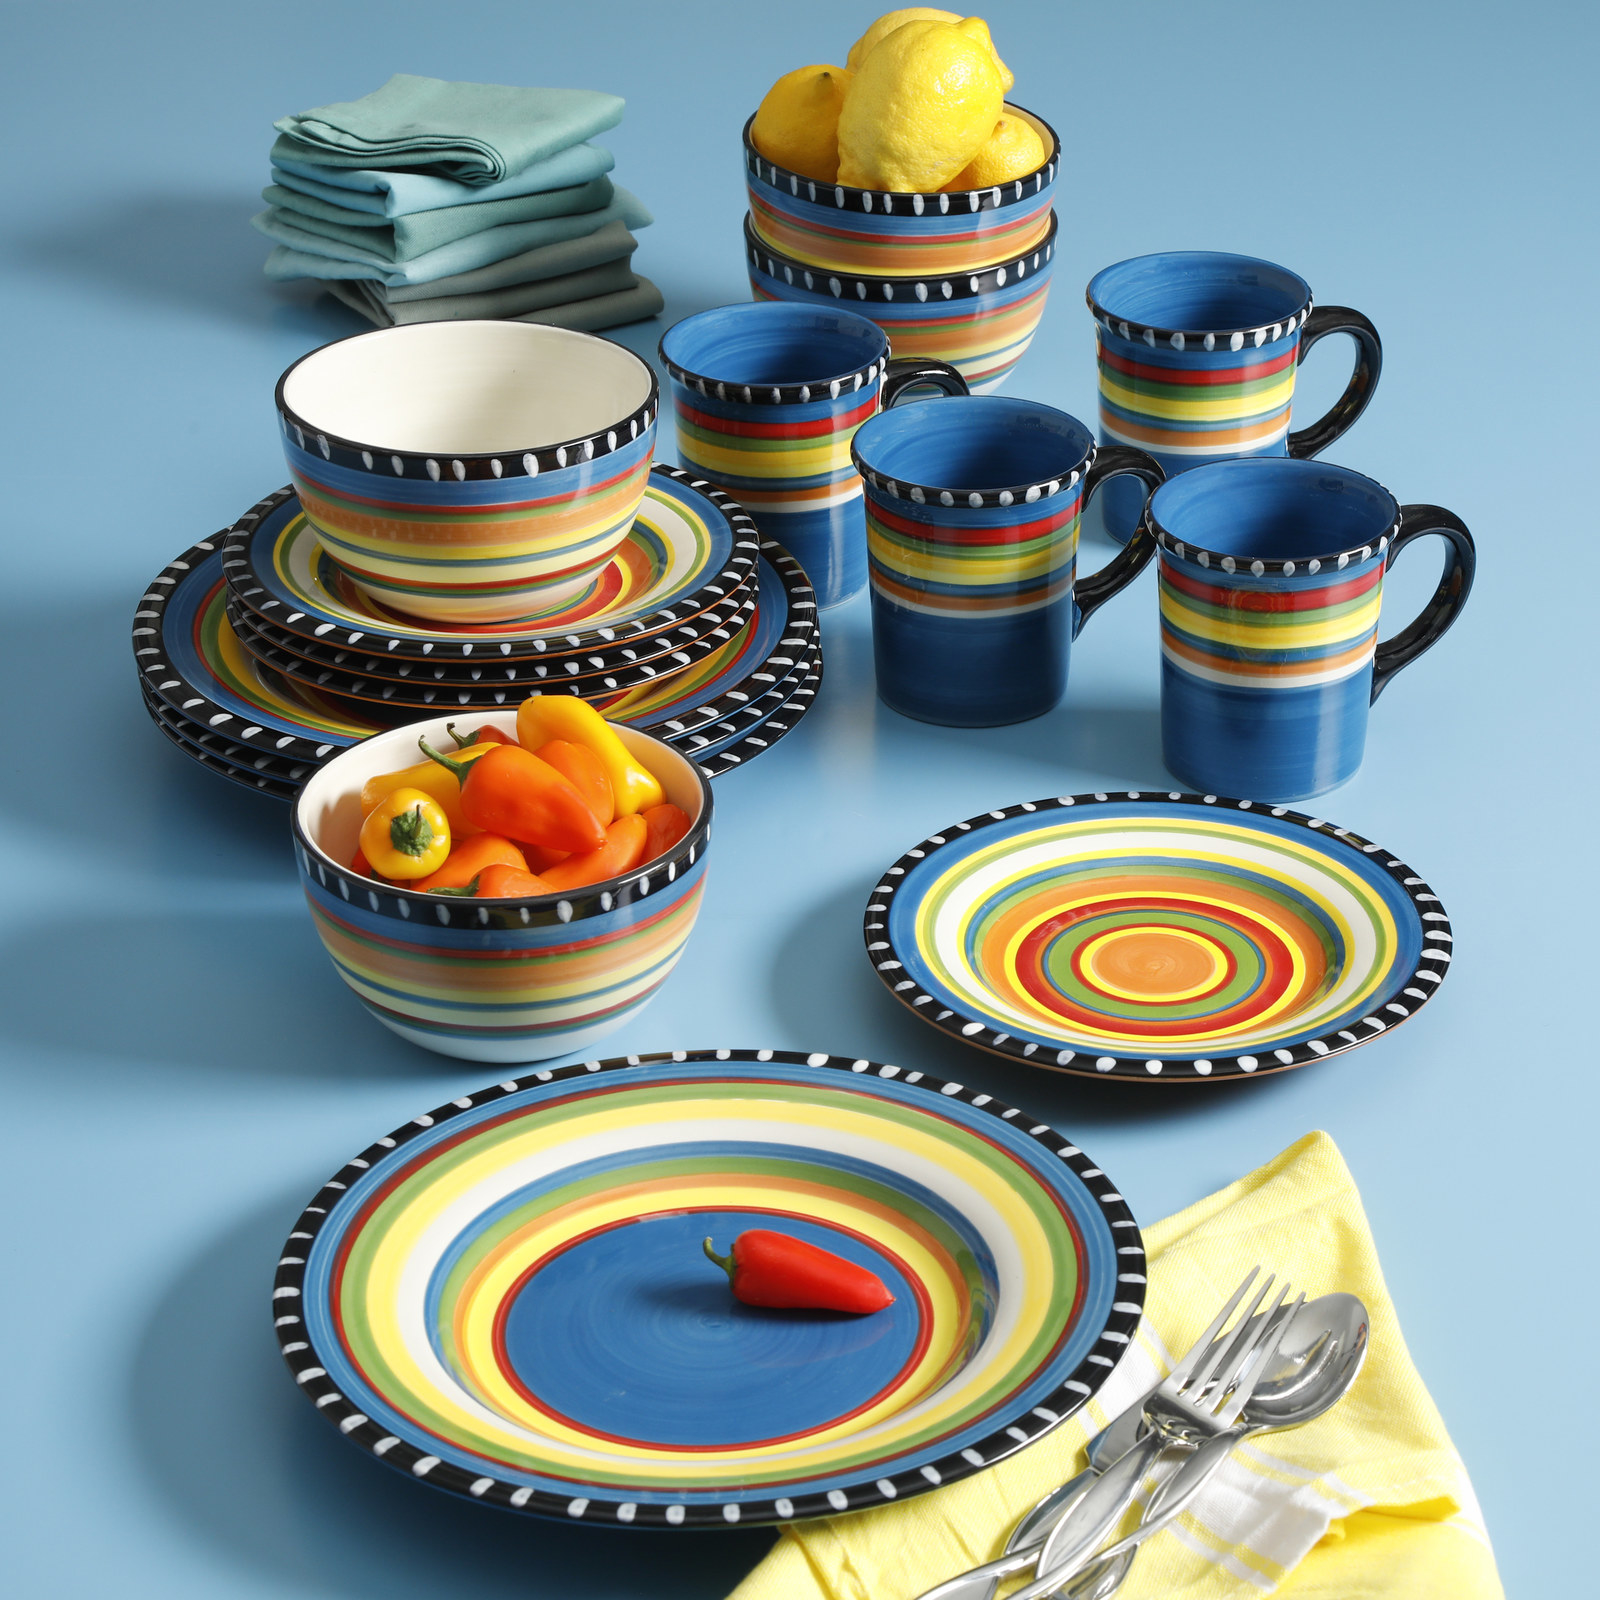 Small Salad Plates and Large Dinner Plates, 4 Blue Tree and Truck Design Bowls 53294 Life is Better at The Campsite Dishware Set Includes 4 Top Rack Dishwasher Safe 4 